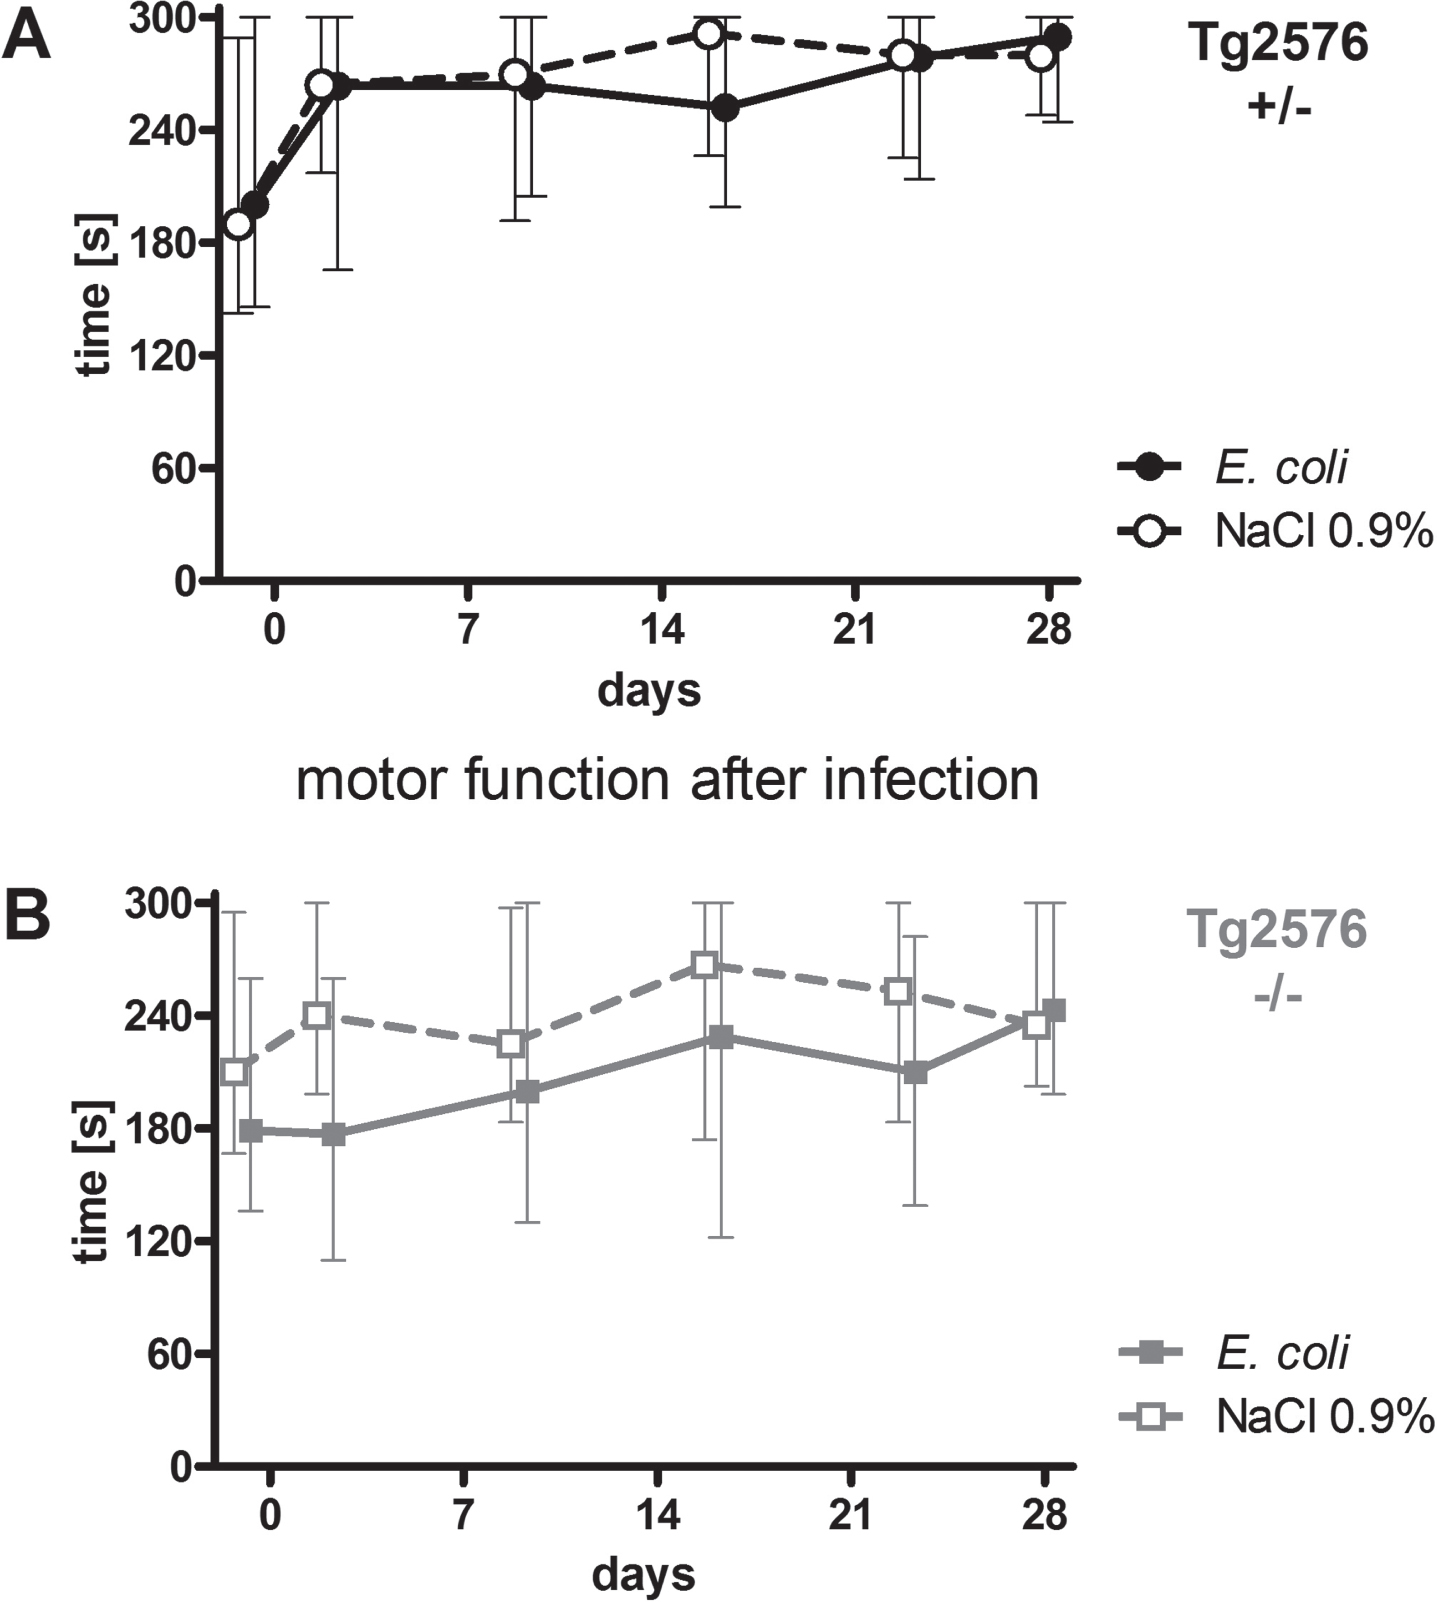 Motor function of Tg2576 +/- and Tg2576 -/- mice after surviving an intracerebral E. coli infection. A) Performance of surviving infected Tg2576 +/- mice (n = 18) in the rotarod test did not differ from that of uninfected Tg2576 +/- mice (n = 14) up to 4 weeks after intracerebral E. coli infection (comparison of AUCs, Mann-Whitney U-test, p = 0.61). B) Performance of surviving infected Tg2576 -/- mice (n = 15) in the rotarod test did not differ from that of uninfected Tg2576 -/- mice (n = 17) up to 4 weeks after intracerebral E. coli infection (comparison of AUCs, Mann-Whitney U-test, p = 0.19). Medians (25./75. percentiles) of times that mice remained on the rotarod are presented (minimum 0, maximum 300 s).